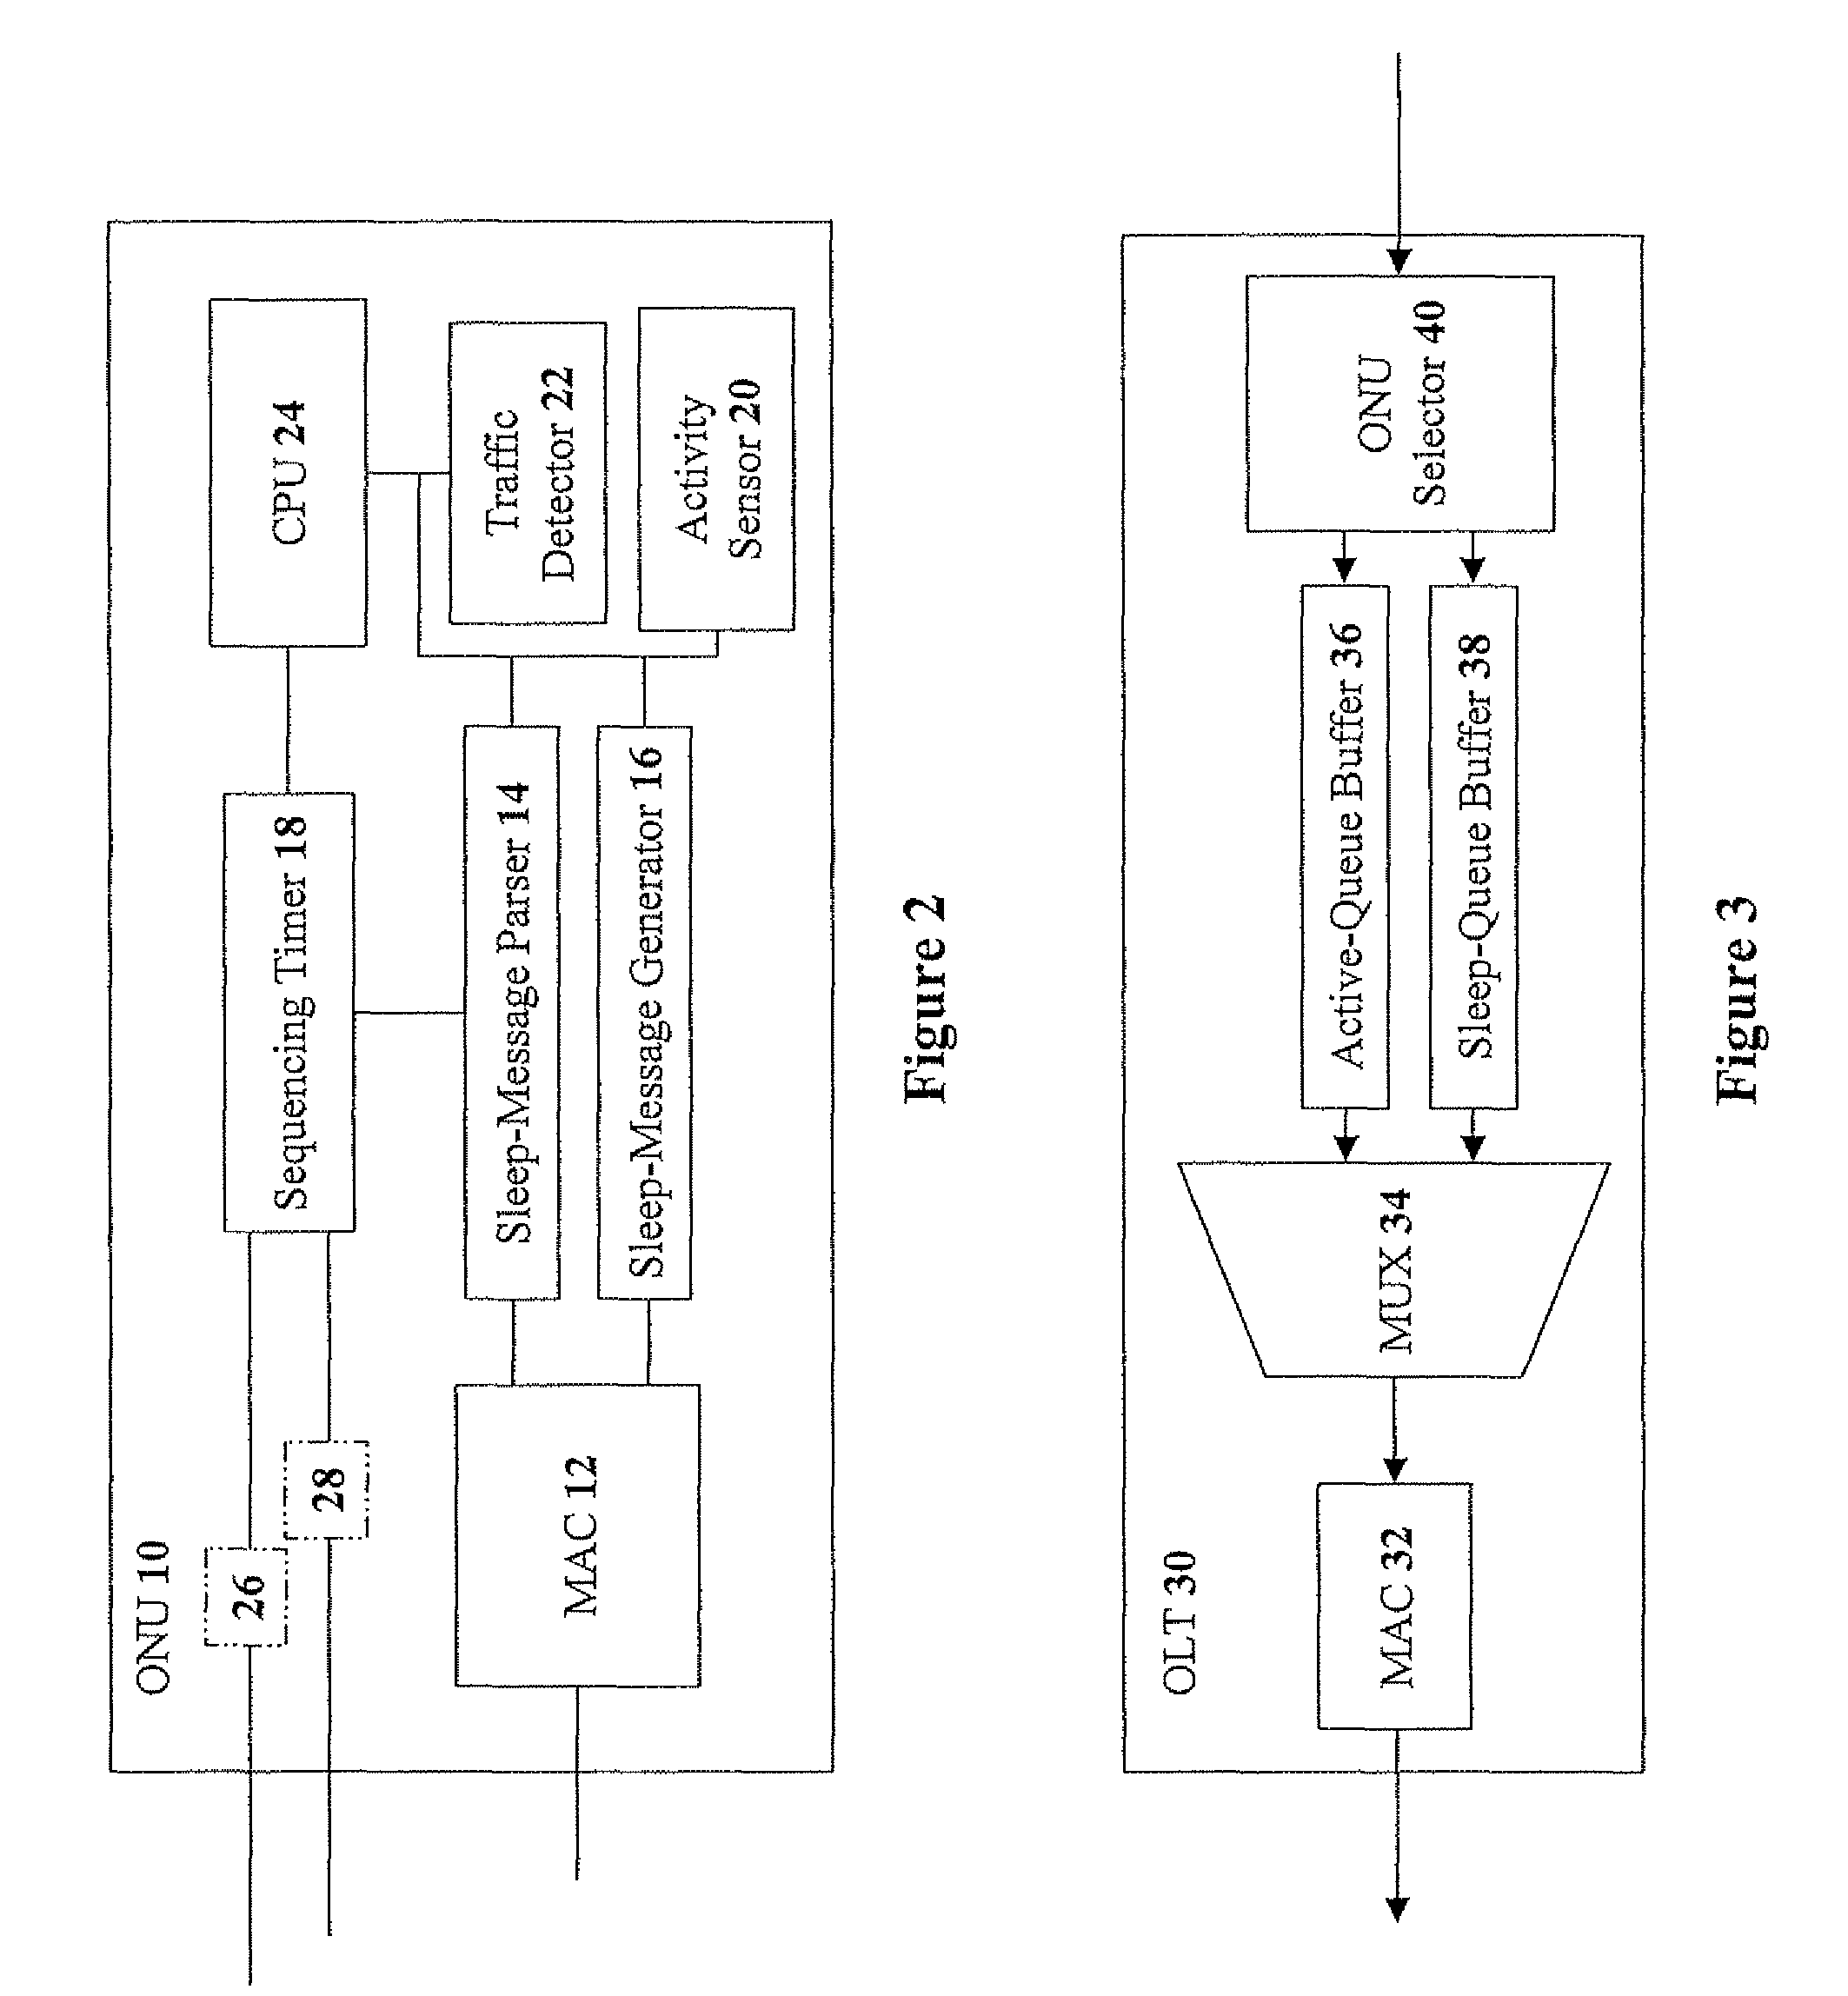 Methods and devices for reducing power consumption in a passive optical network while maintaining service continuity